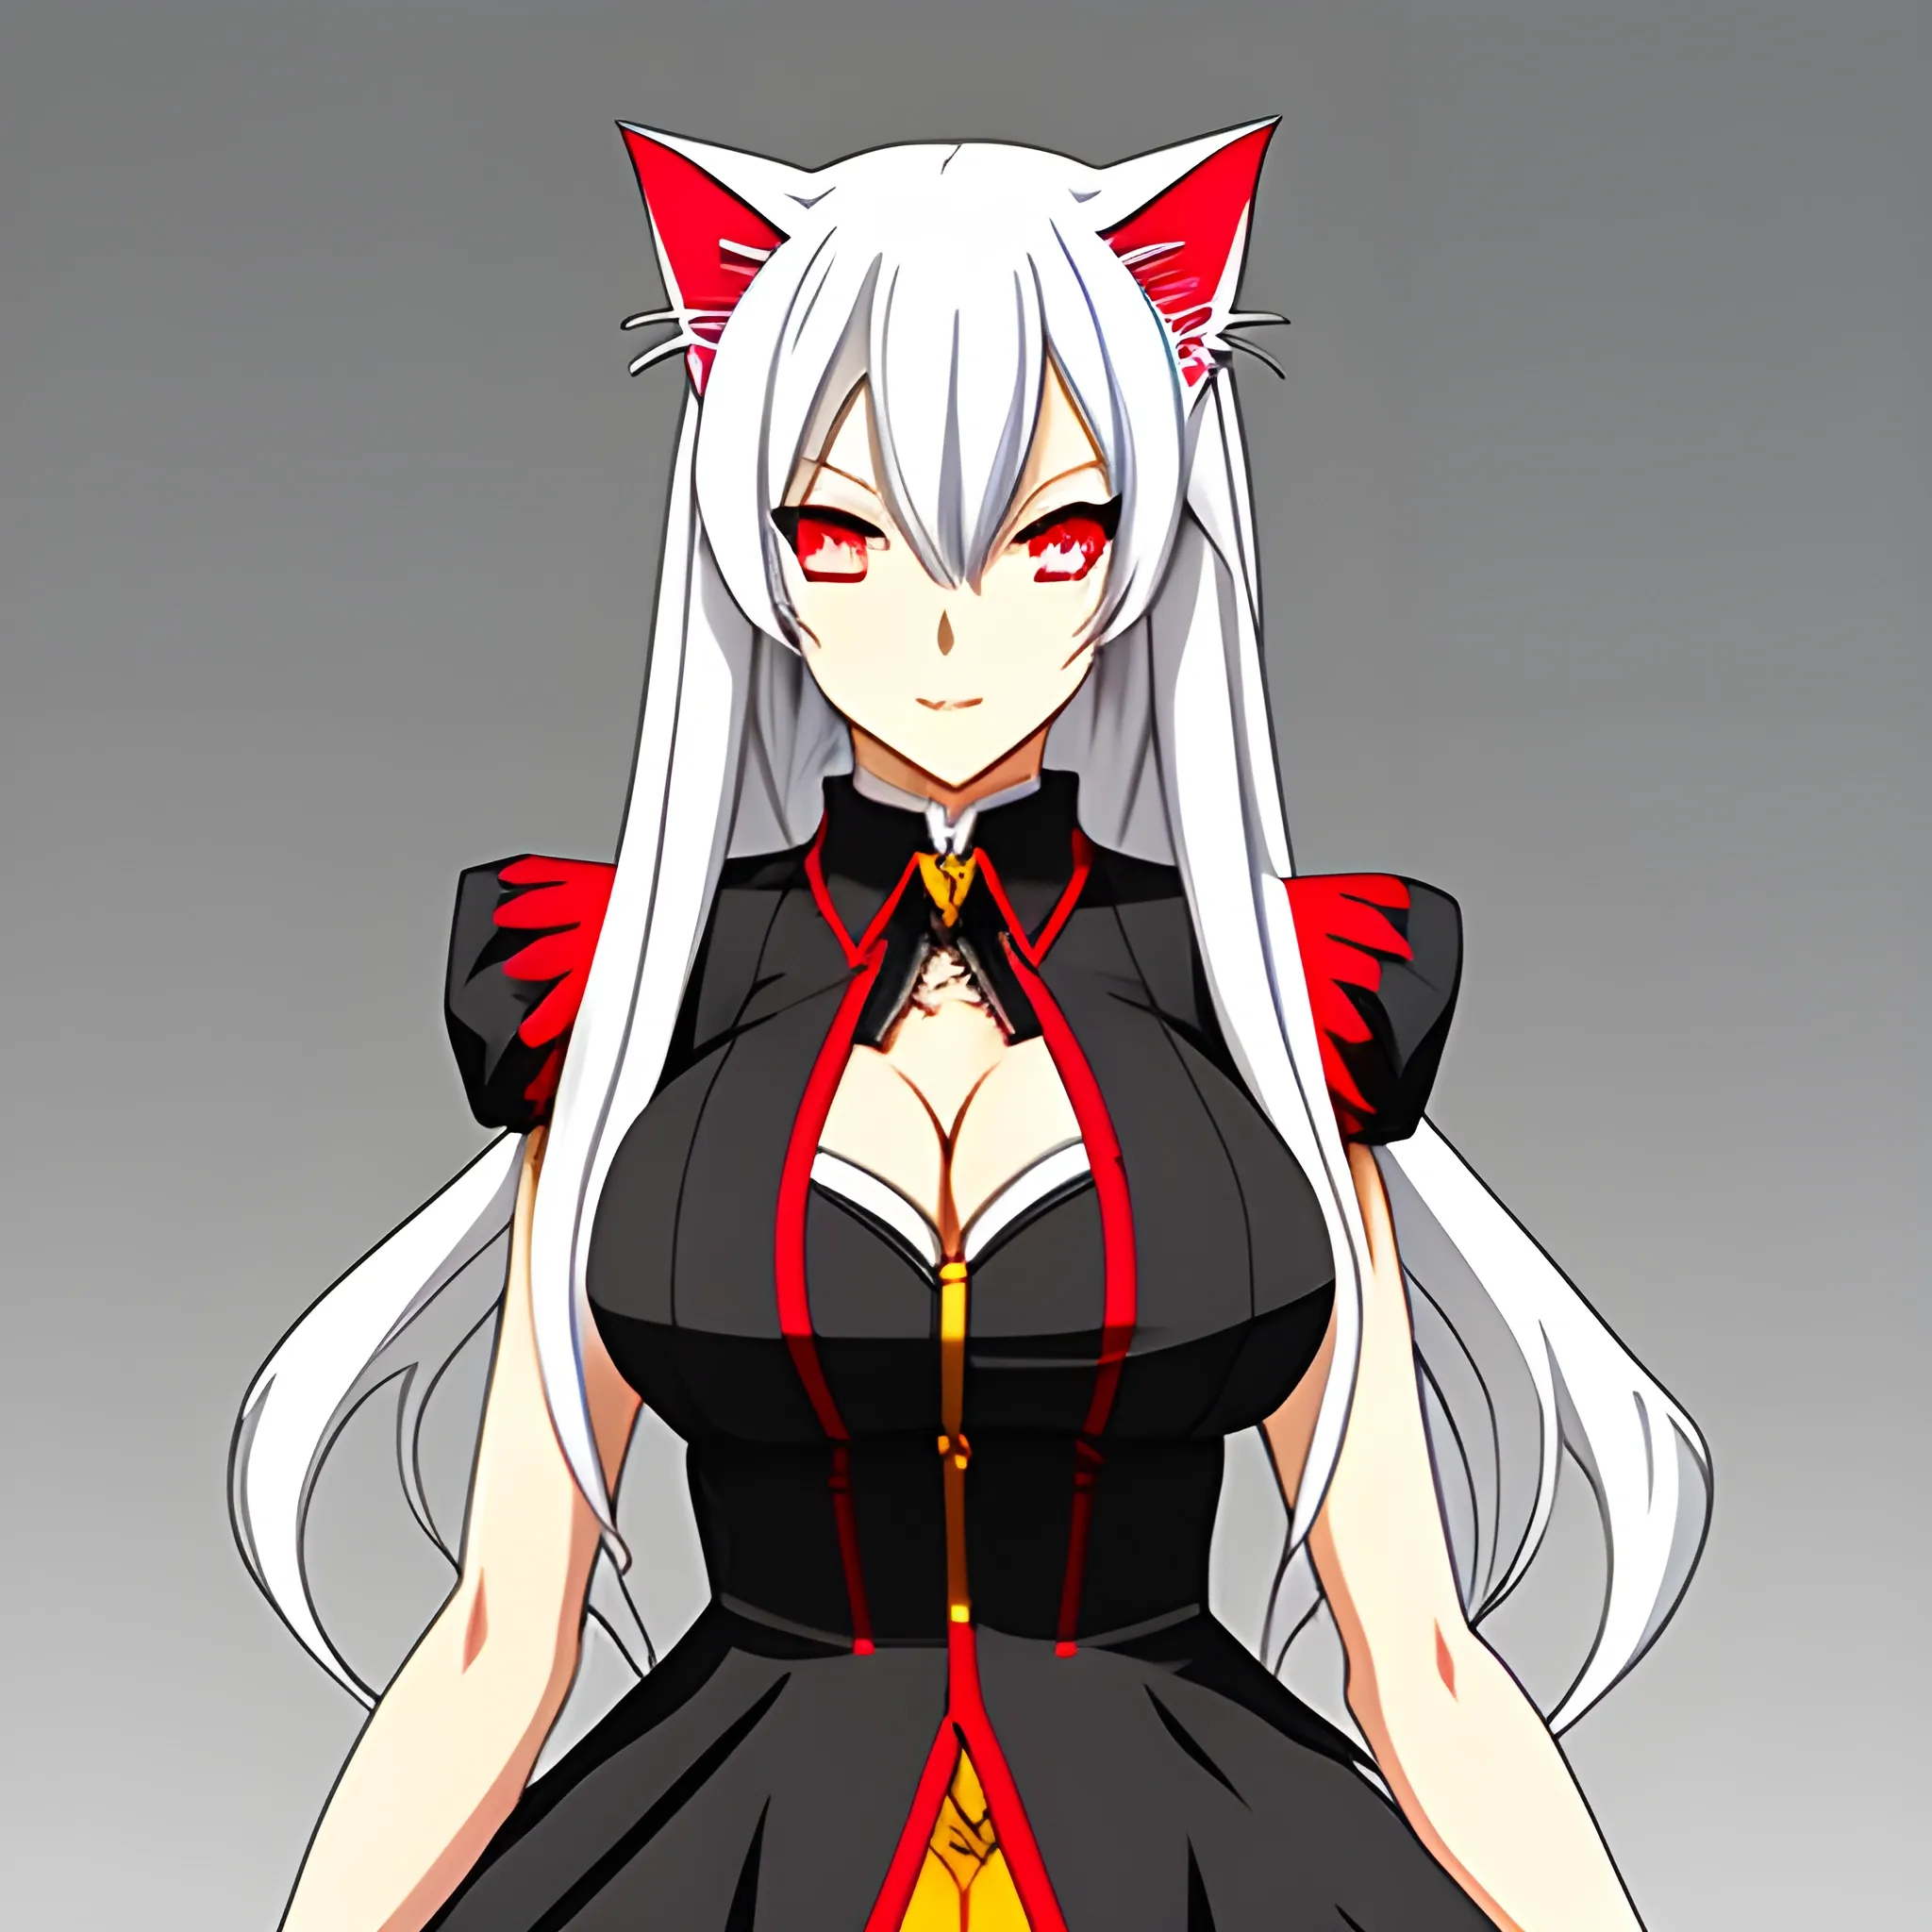 An anime cat girl who looks in her mid 20's, with long white hai 